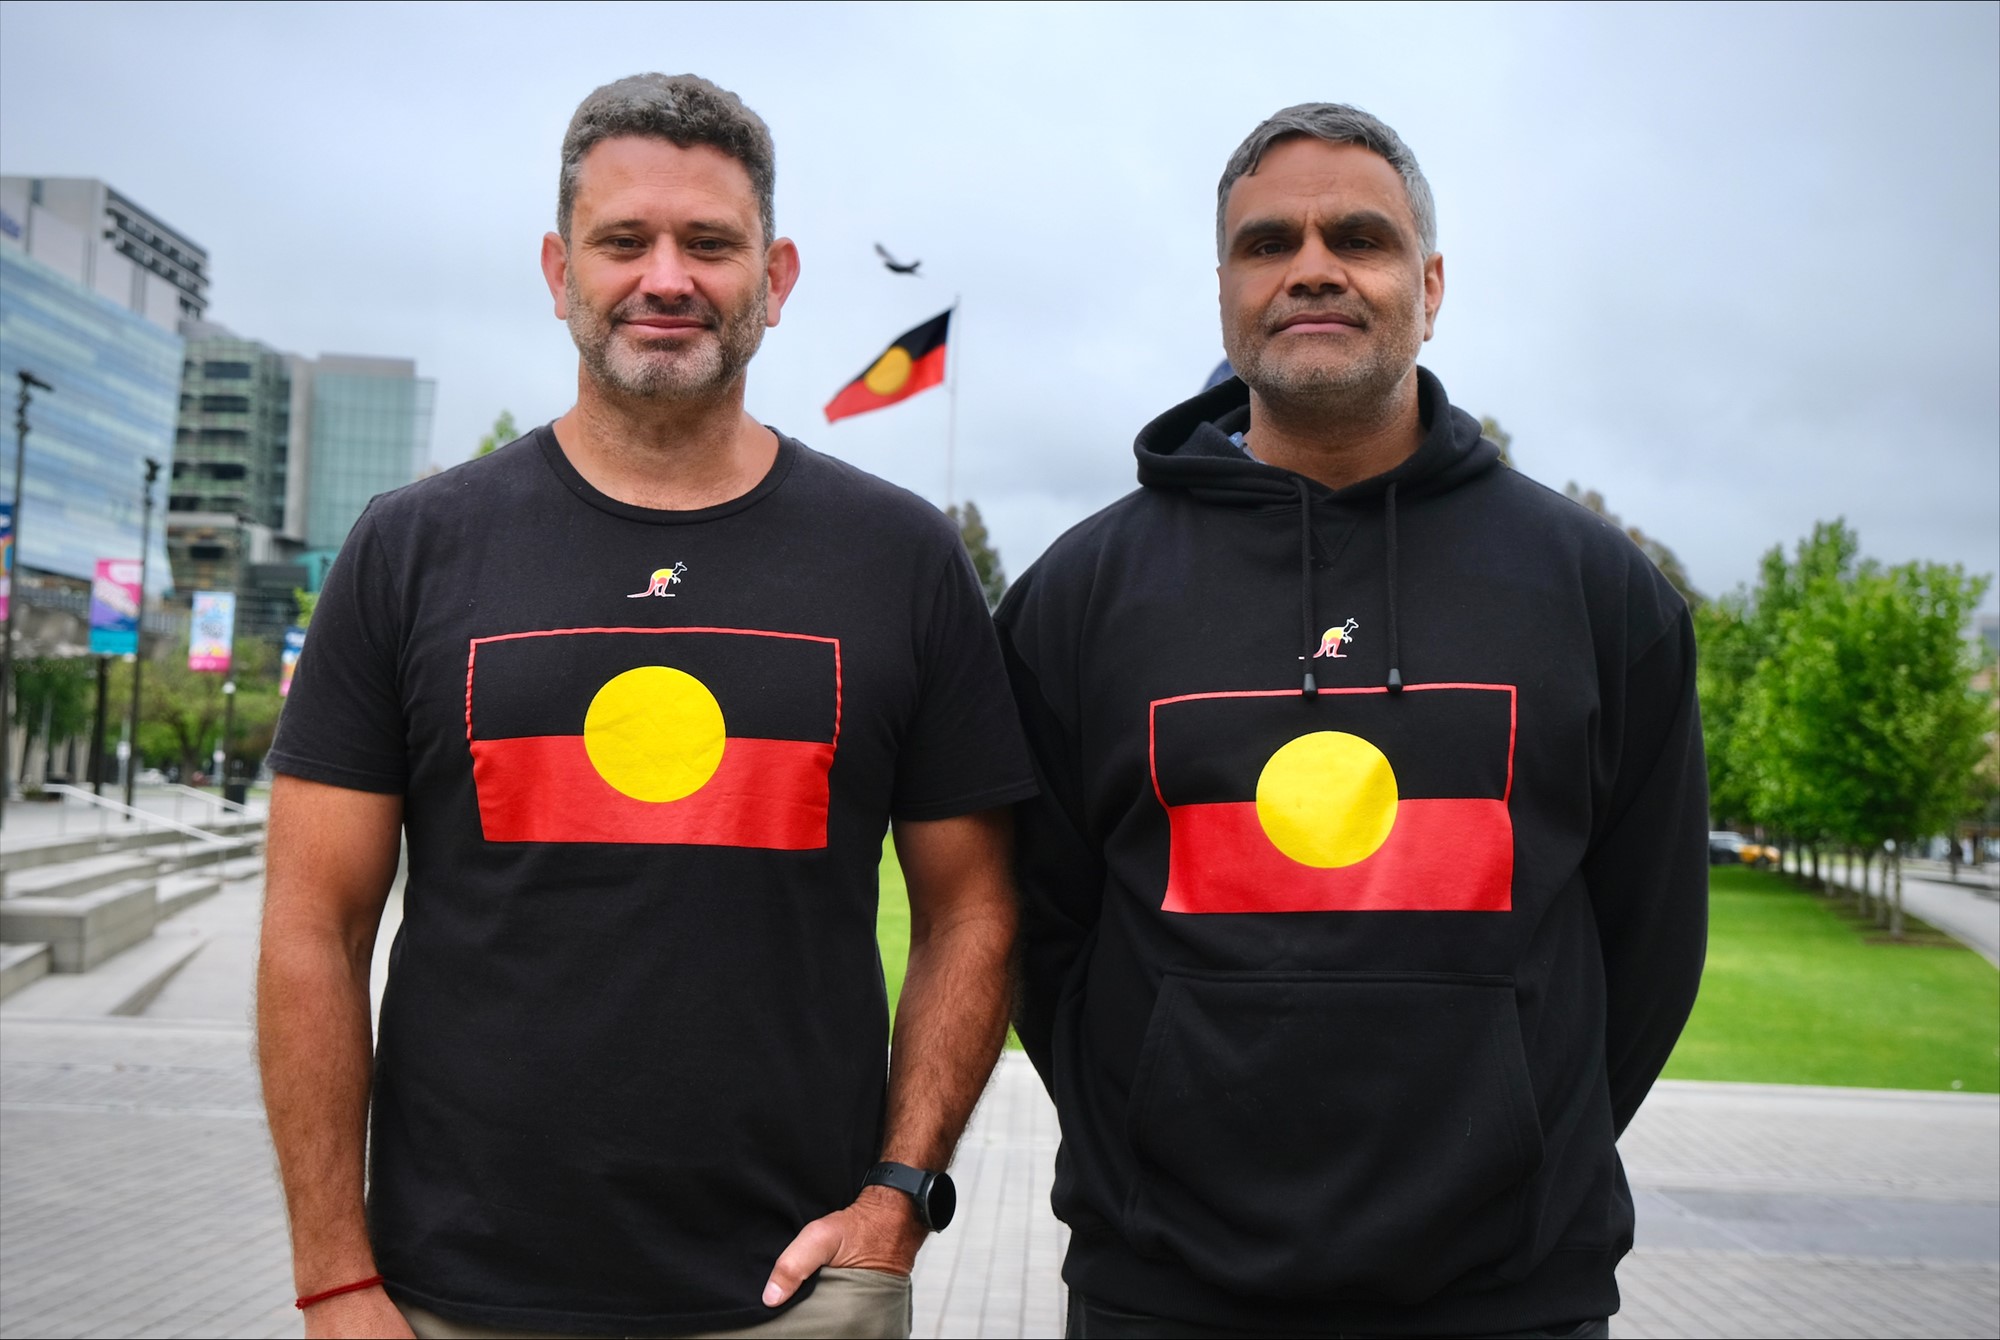 Two men stand wearing Aborignal flag t-shirts.